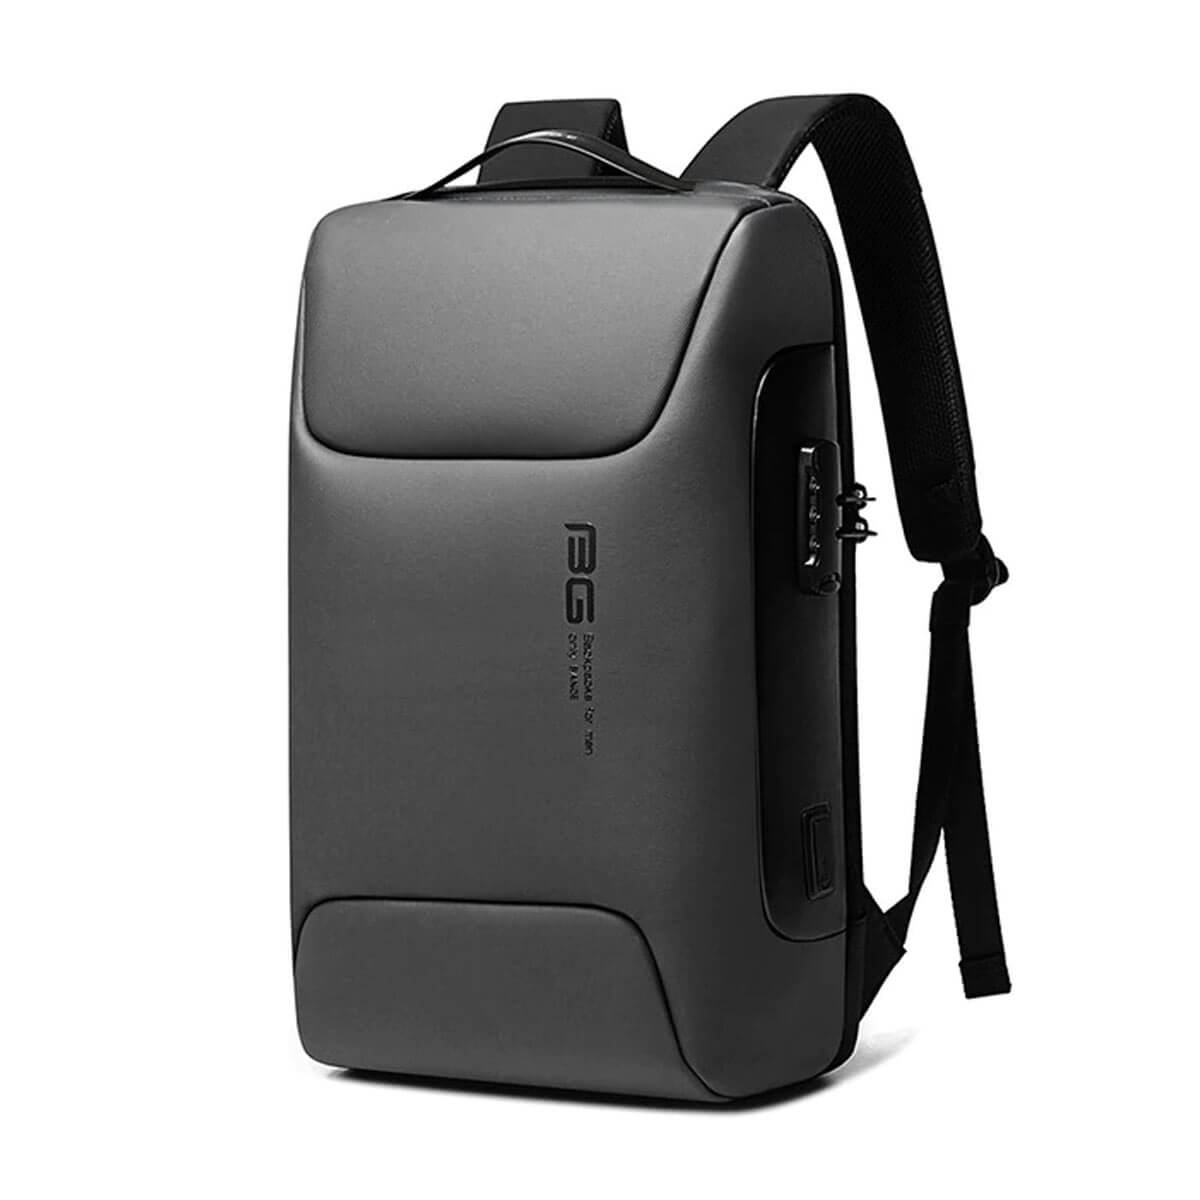 15.6 Laptop Backpack with USB Charging - Waterproof Travel Laptop Backpack